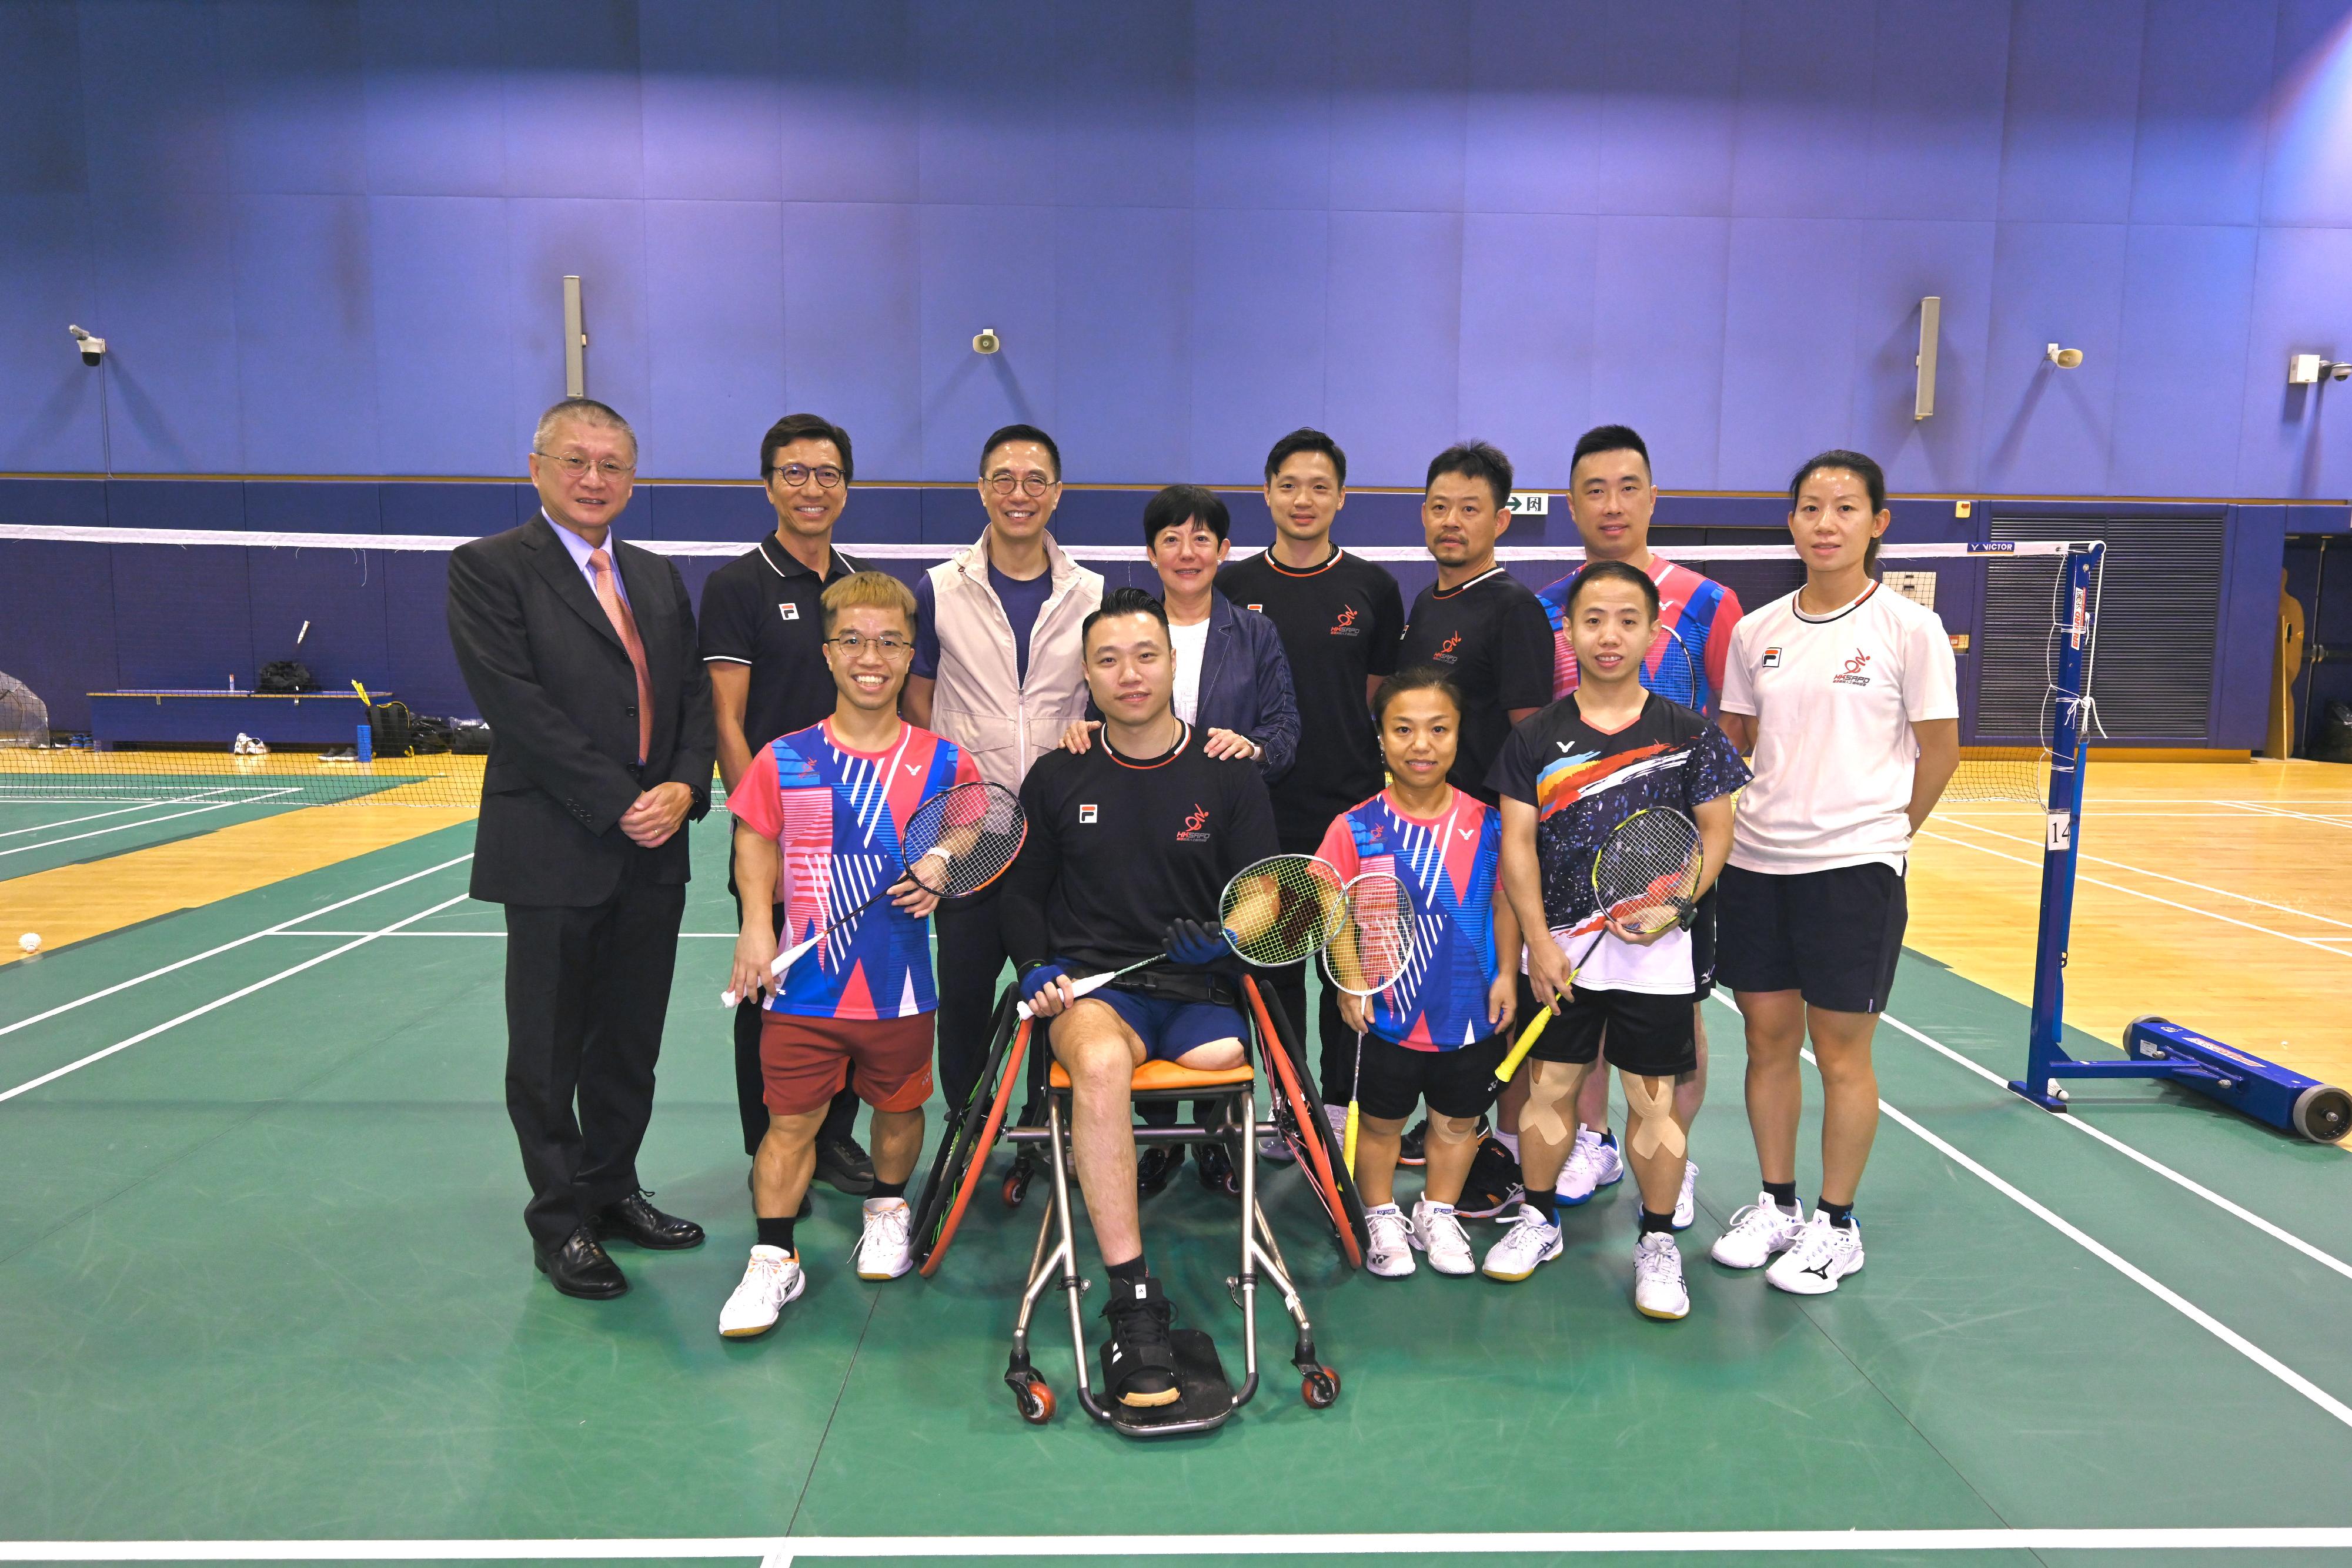 The Secretary for Culture, Sports and Tourism, Mr Kevin Yeung (back row, third left), and the Commissioner for Sports, Mr Sam Wong (back row, second left), this morning (September 14) visited the Hong Kong Sports Institute to exchange with the athletes, including Chan Ho-yuen (front row, second left) and Chu Man-kai (front row, first right), to learn about their preparation for the Asian Para Games in Hangzhou and to cheer for them.